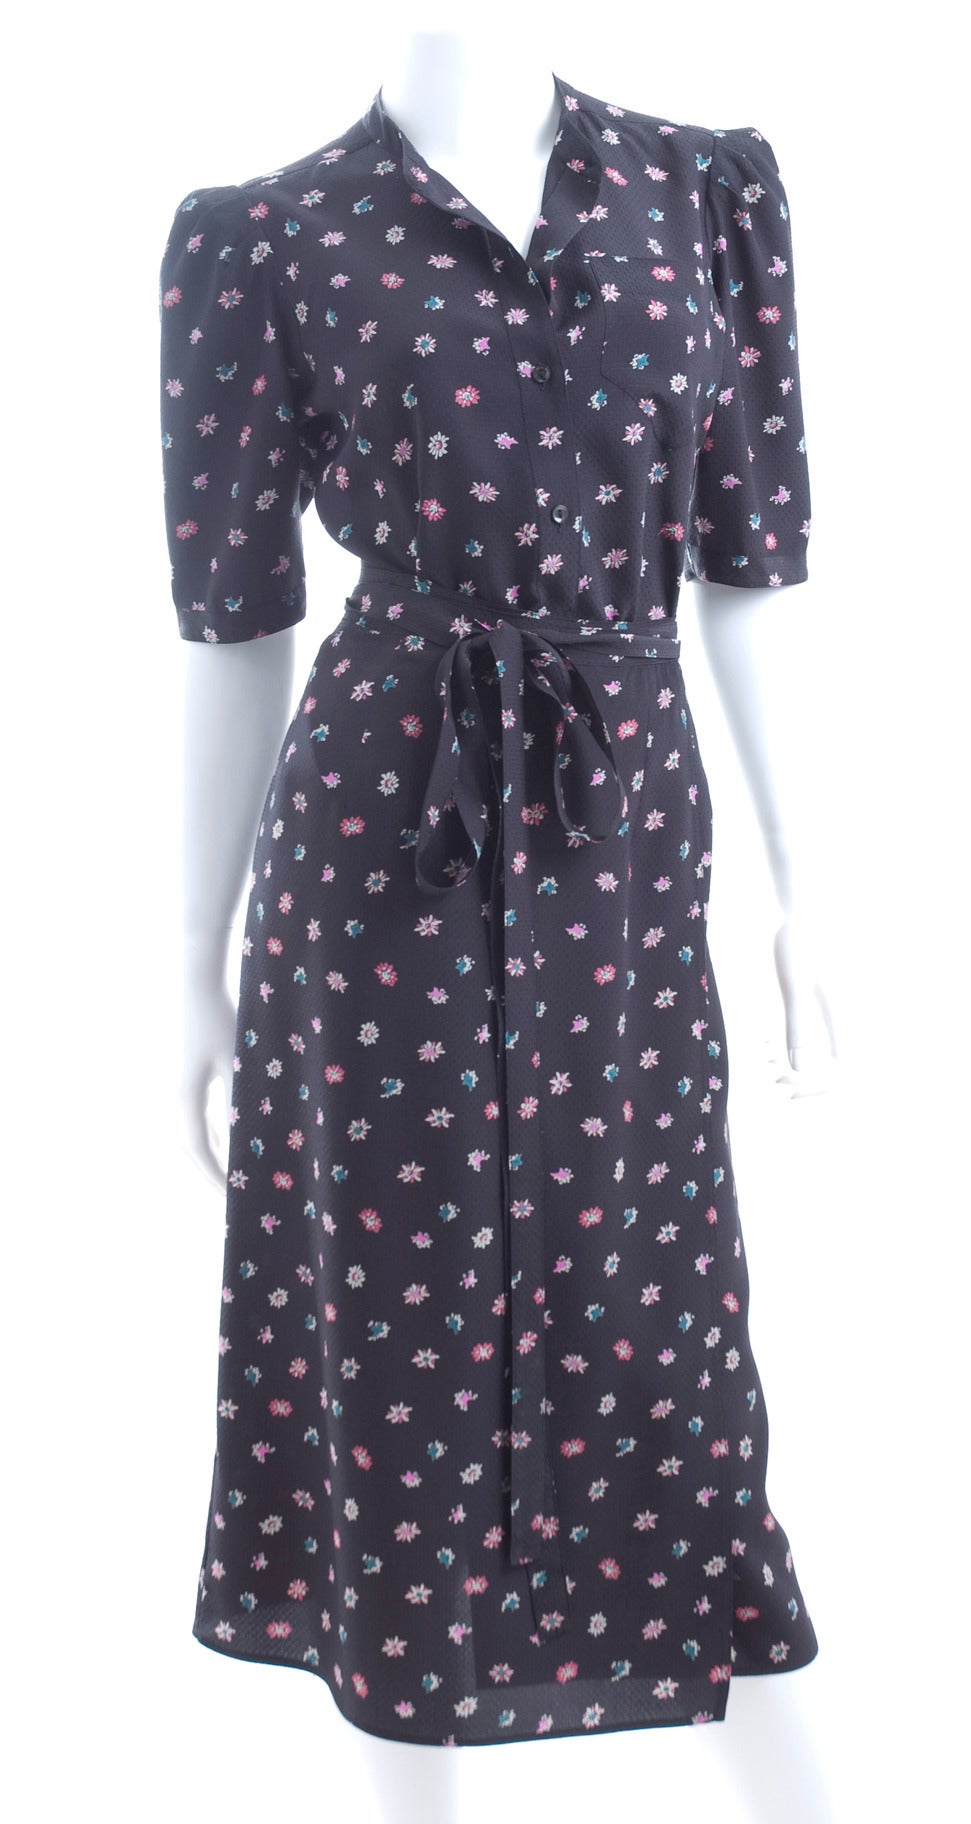 Vintage Chloe 2 piece Ensemble in black silk with small flower print.
Wrap skirt and blouse to wear as a short sleeve jacket or tucked in
as a dress look.
Size label is missing.
Excellent condition - no flaws to mention.
Measurements:
The skirt